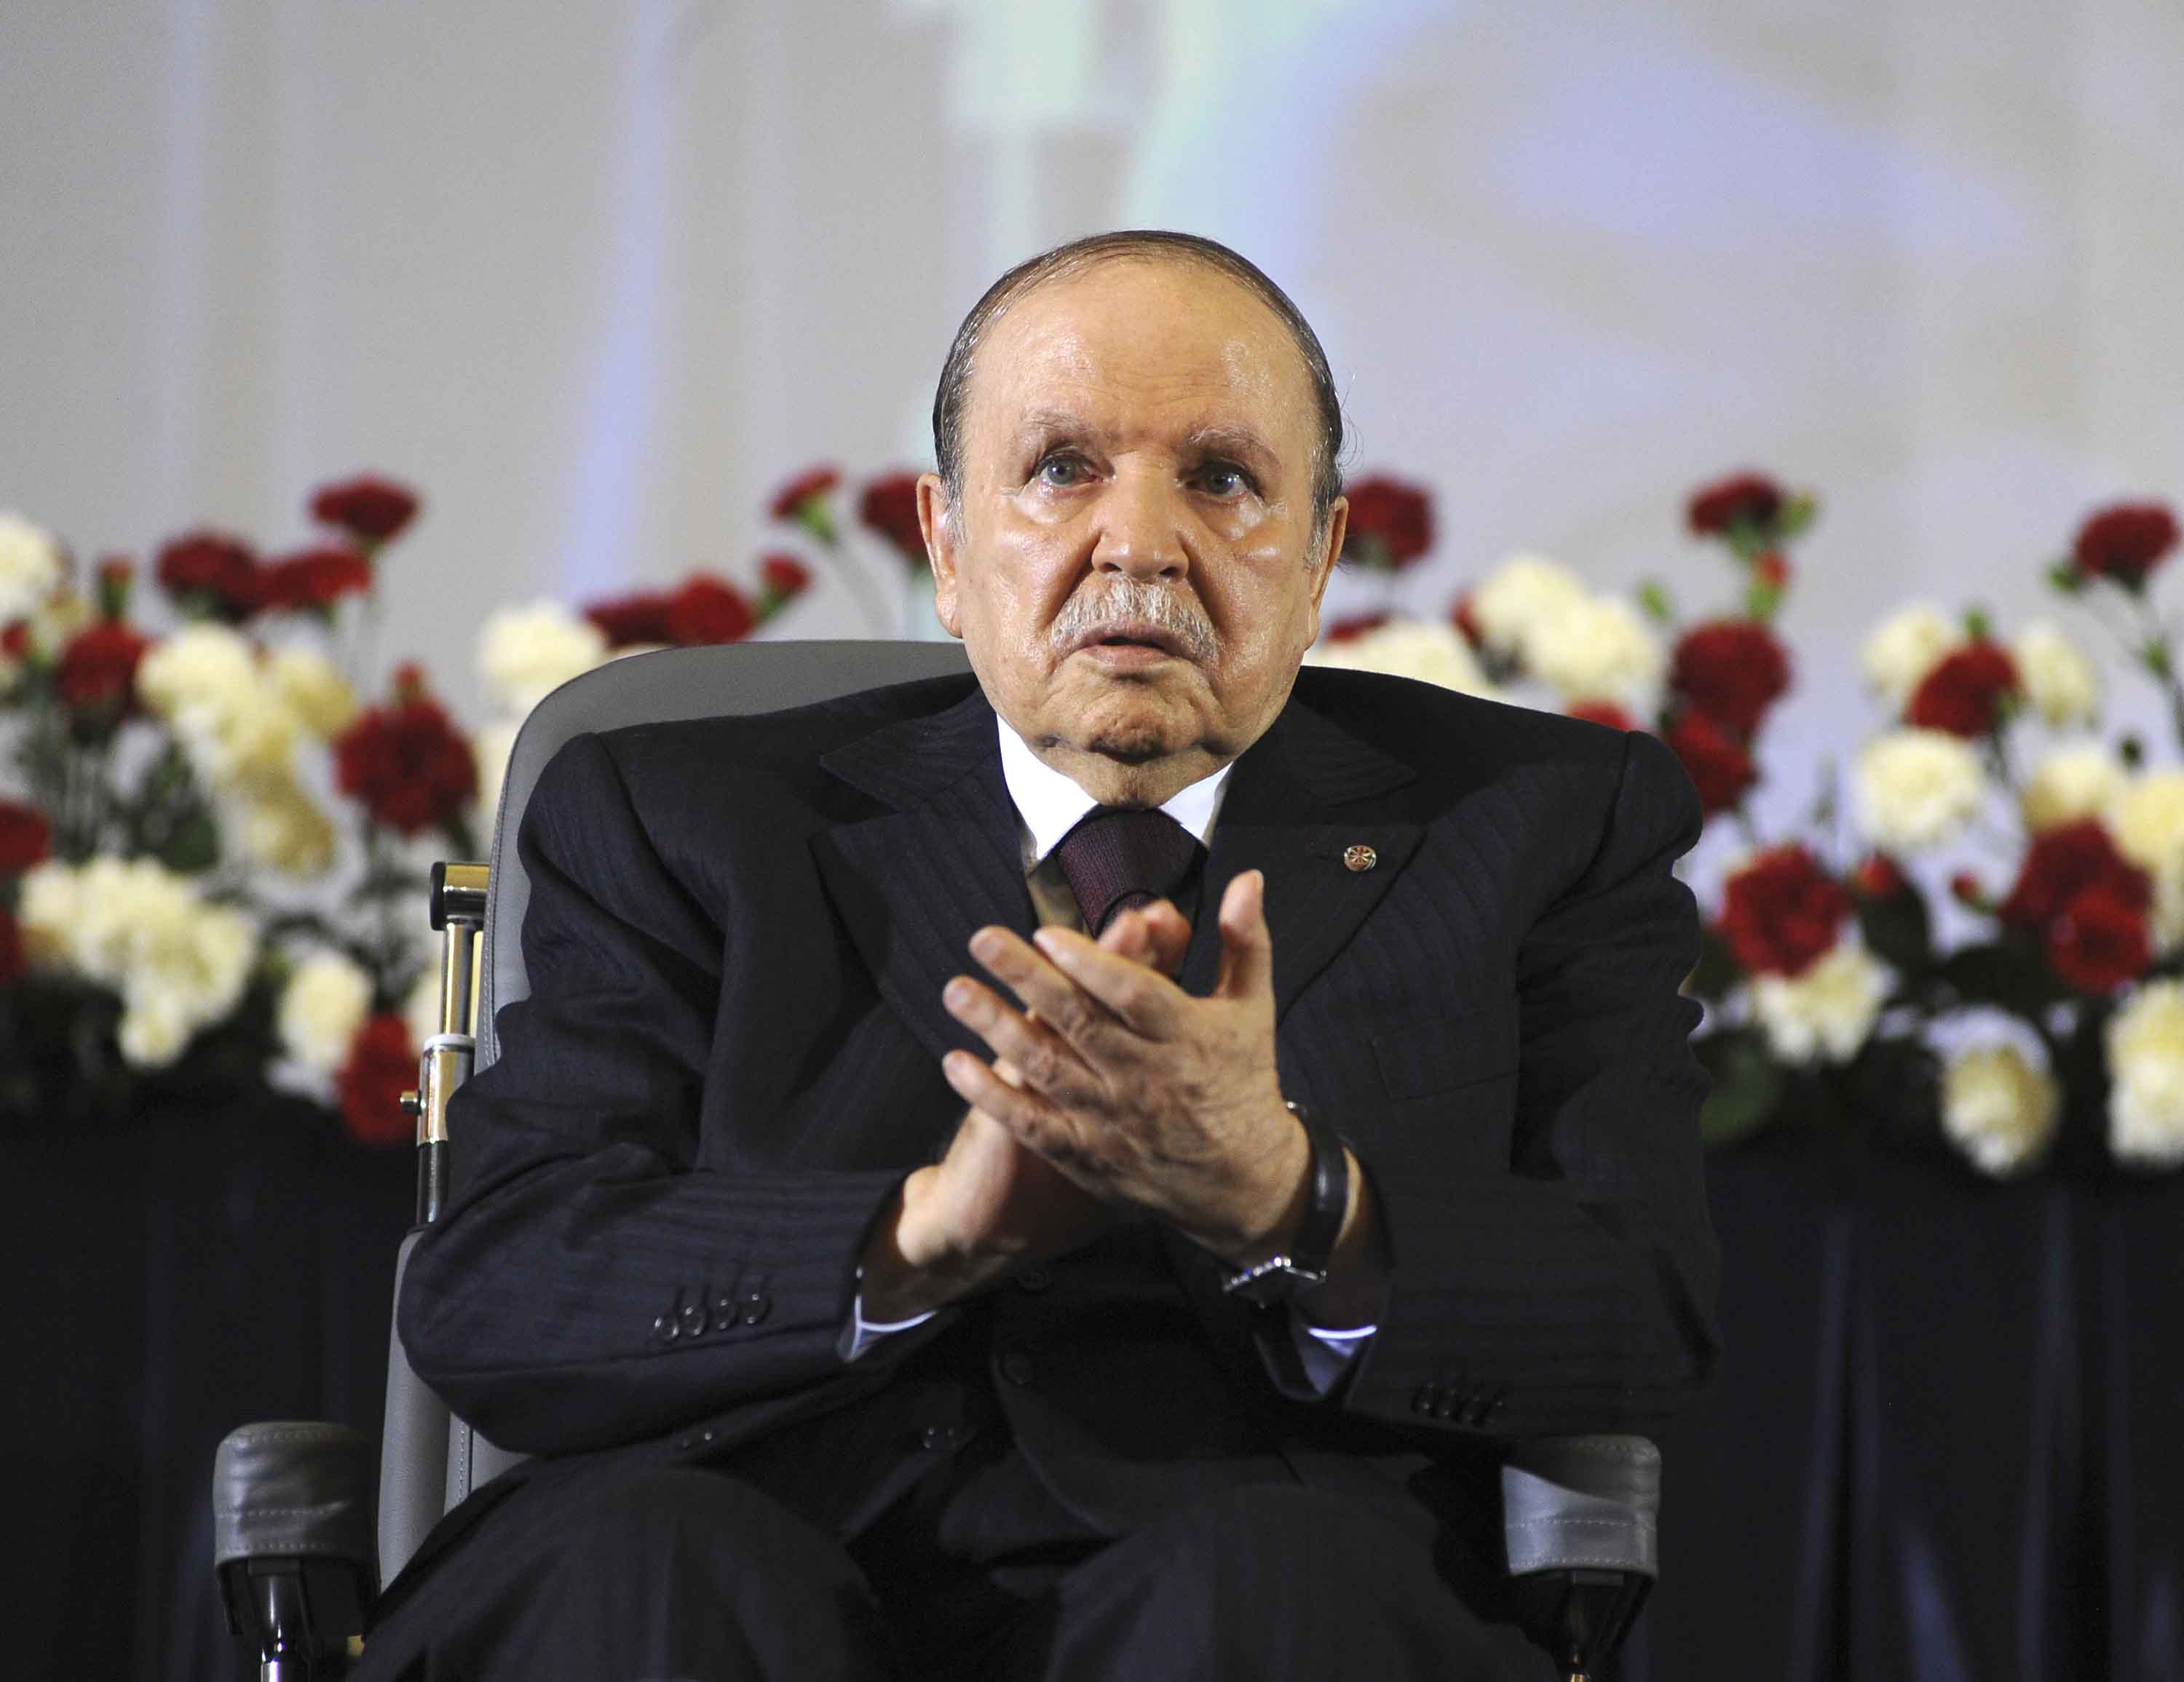 Abdelaziz Bouteflika claps after taking the presidential oath in Algiers, Algeria, in April 2014. It was the start of his fourth term.